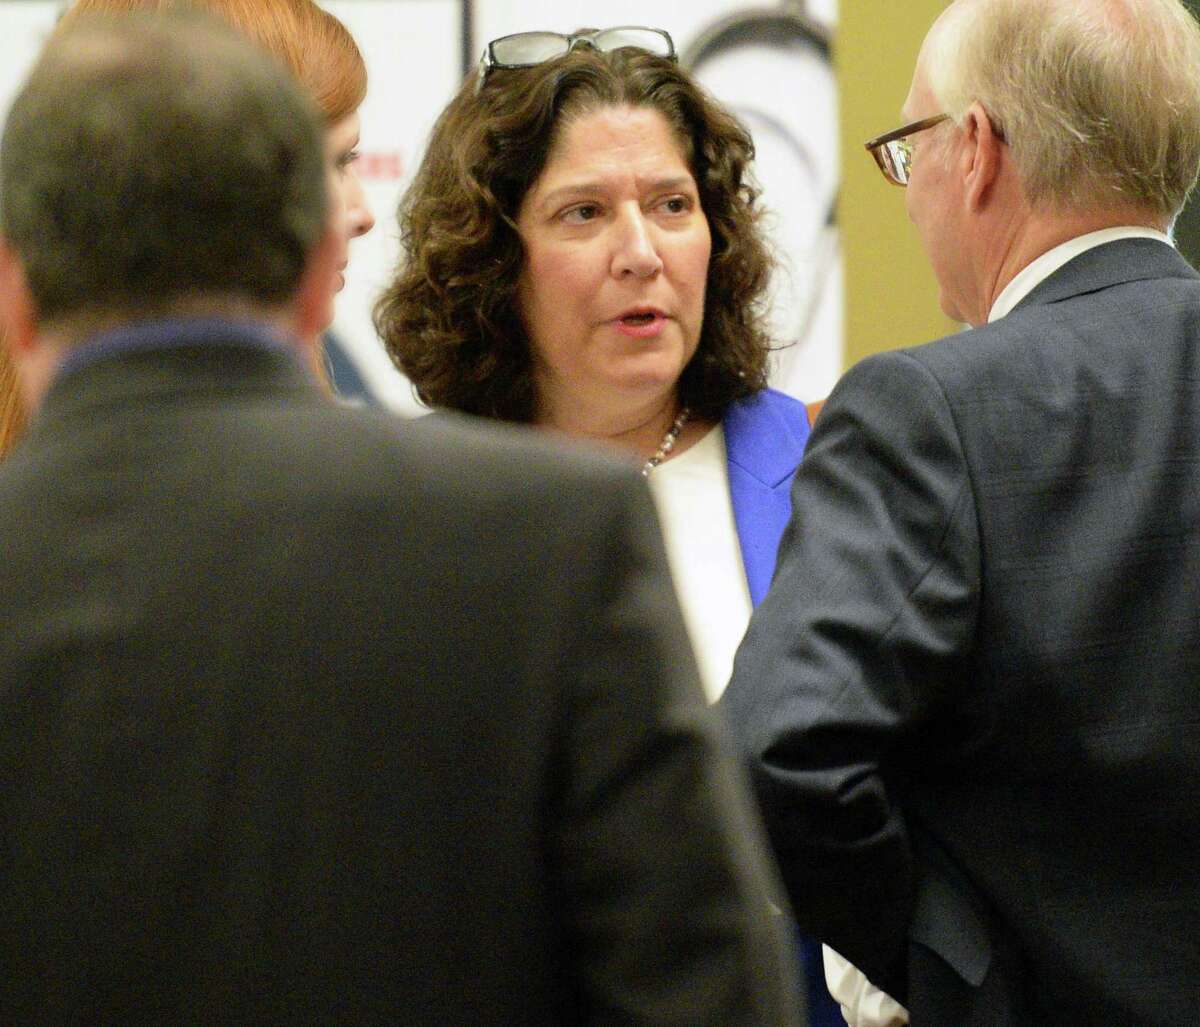 Superintendent of the New York State Department of Financial Services Maria Vullo, center, speaks with attendees during NY Health Plan Association's annual conference Thursday Nov. 17, 2016 in Troy, NY. (John Carl D'Annibale / Times Union)